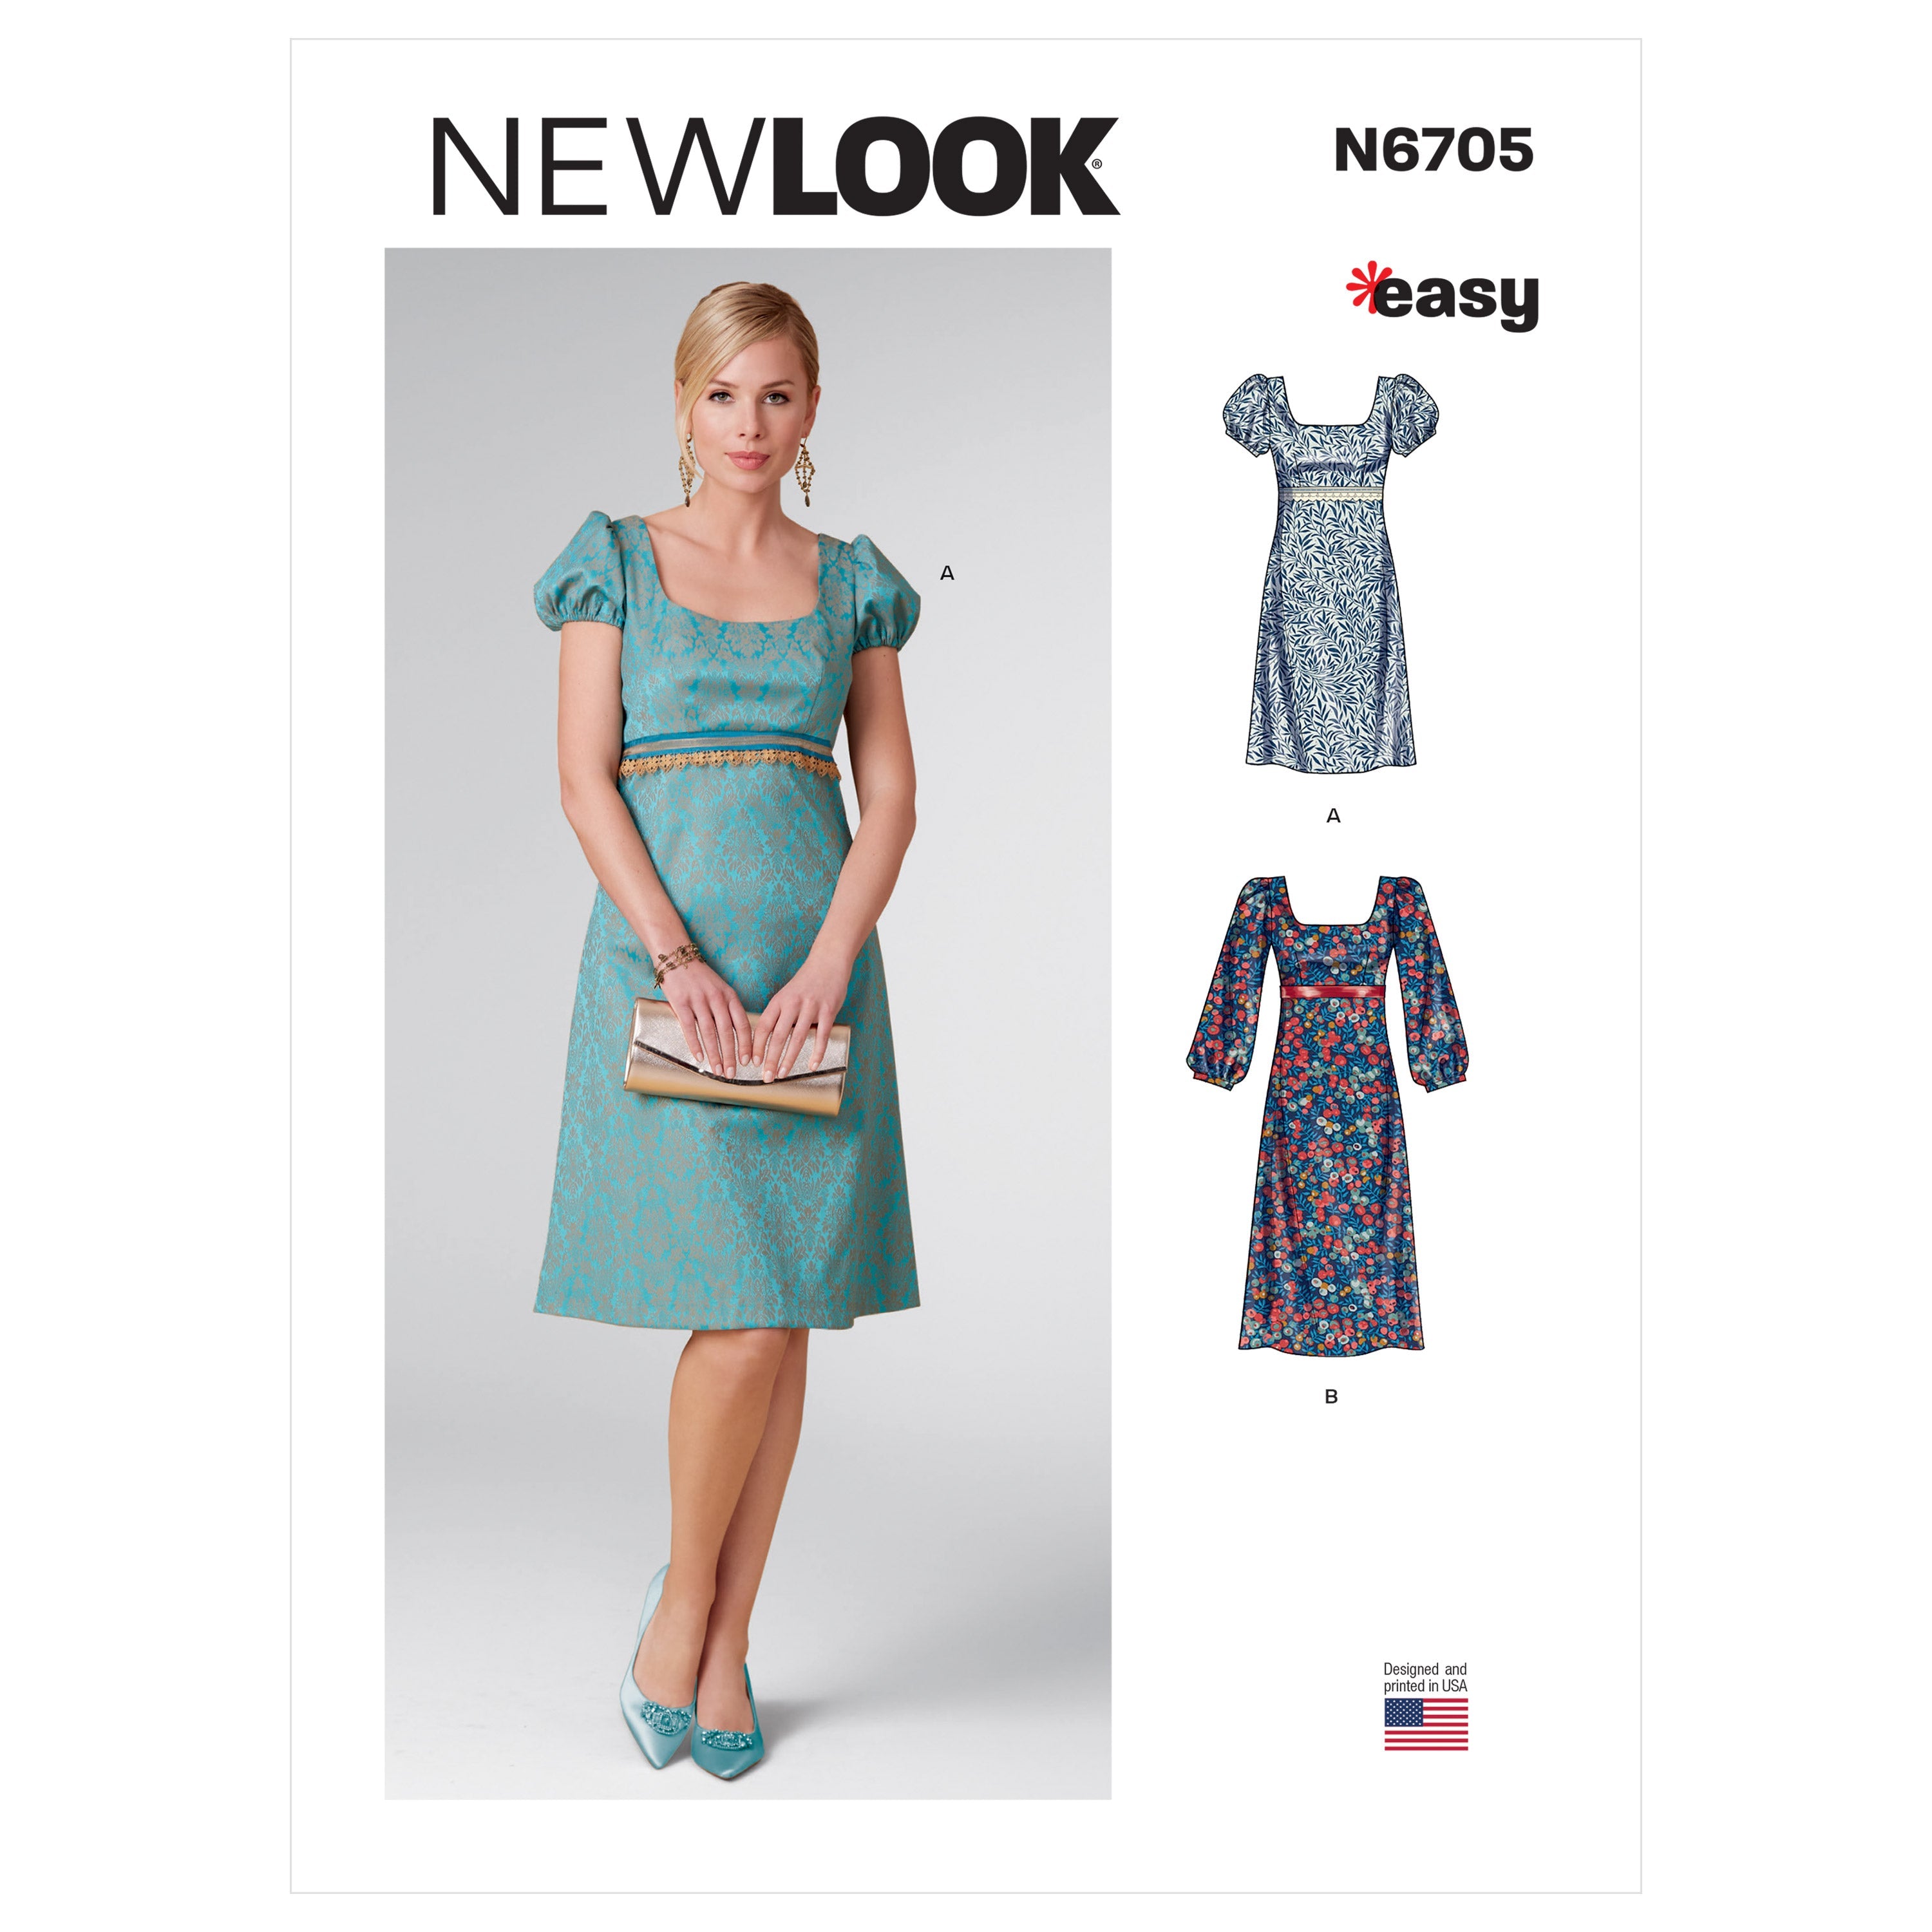 New Look Sewing Pattern 6705 Misses' Dress from Jaycotts Sewing Supplies